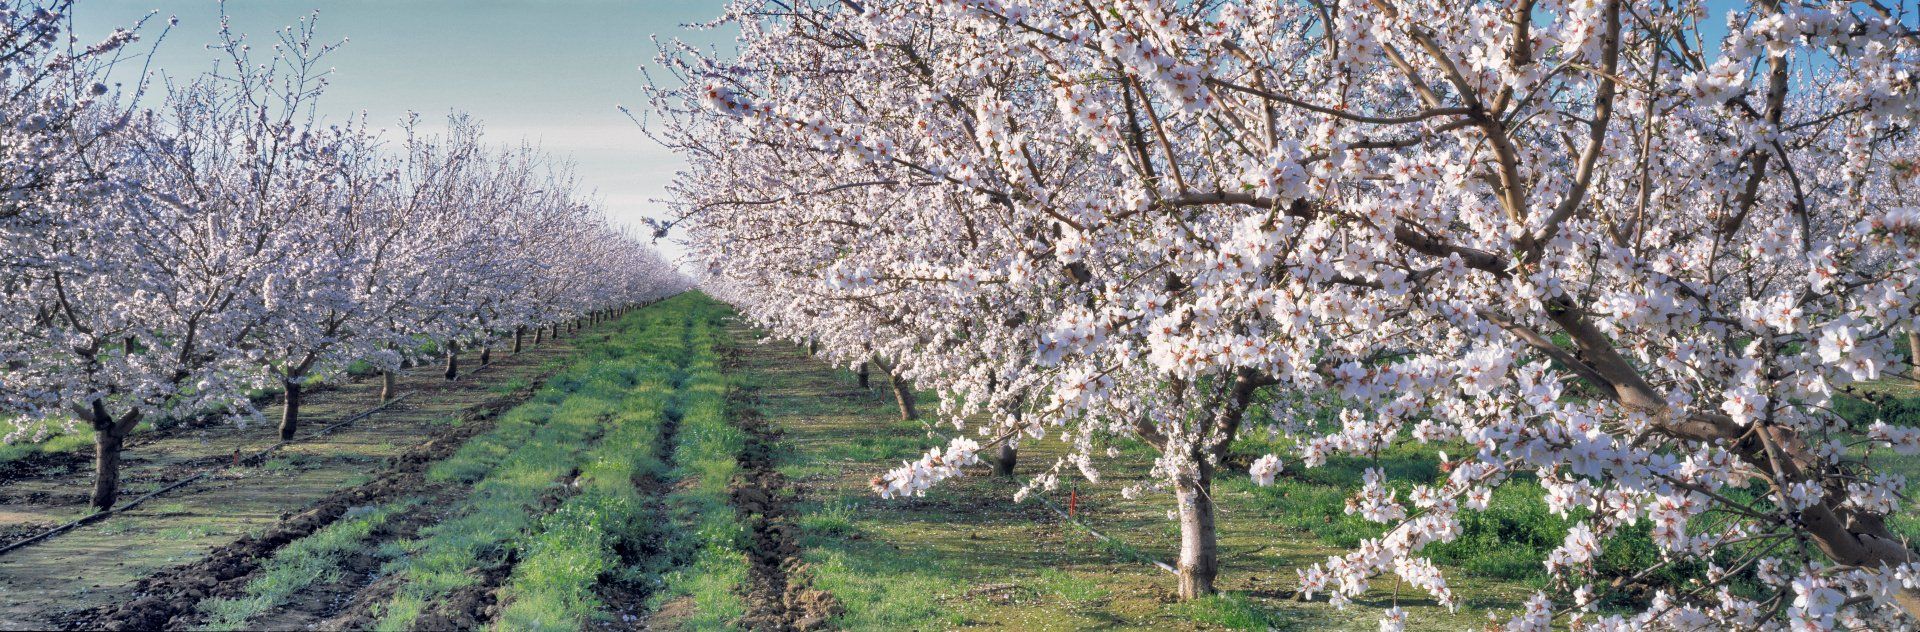 A wide view of a grove of trees with pink blossoms